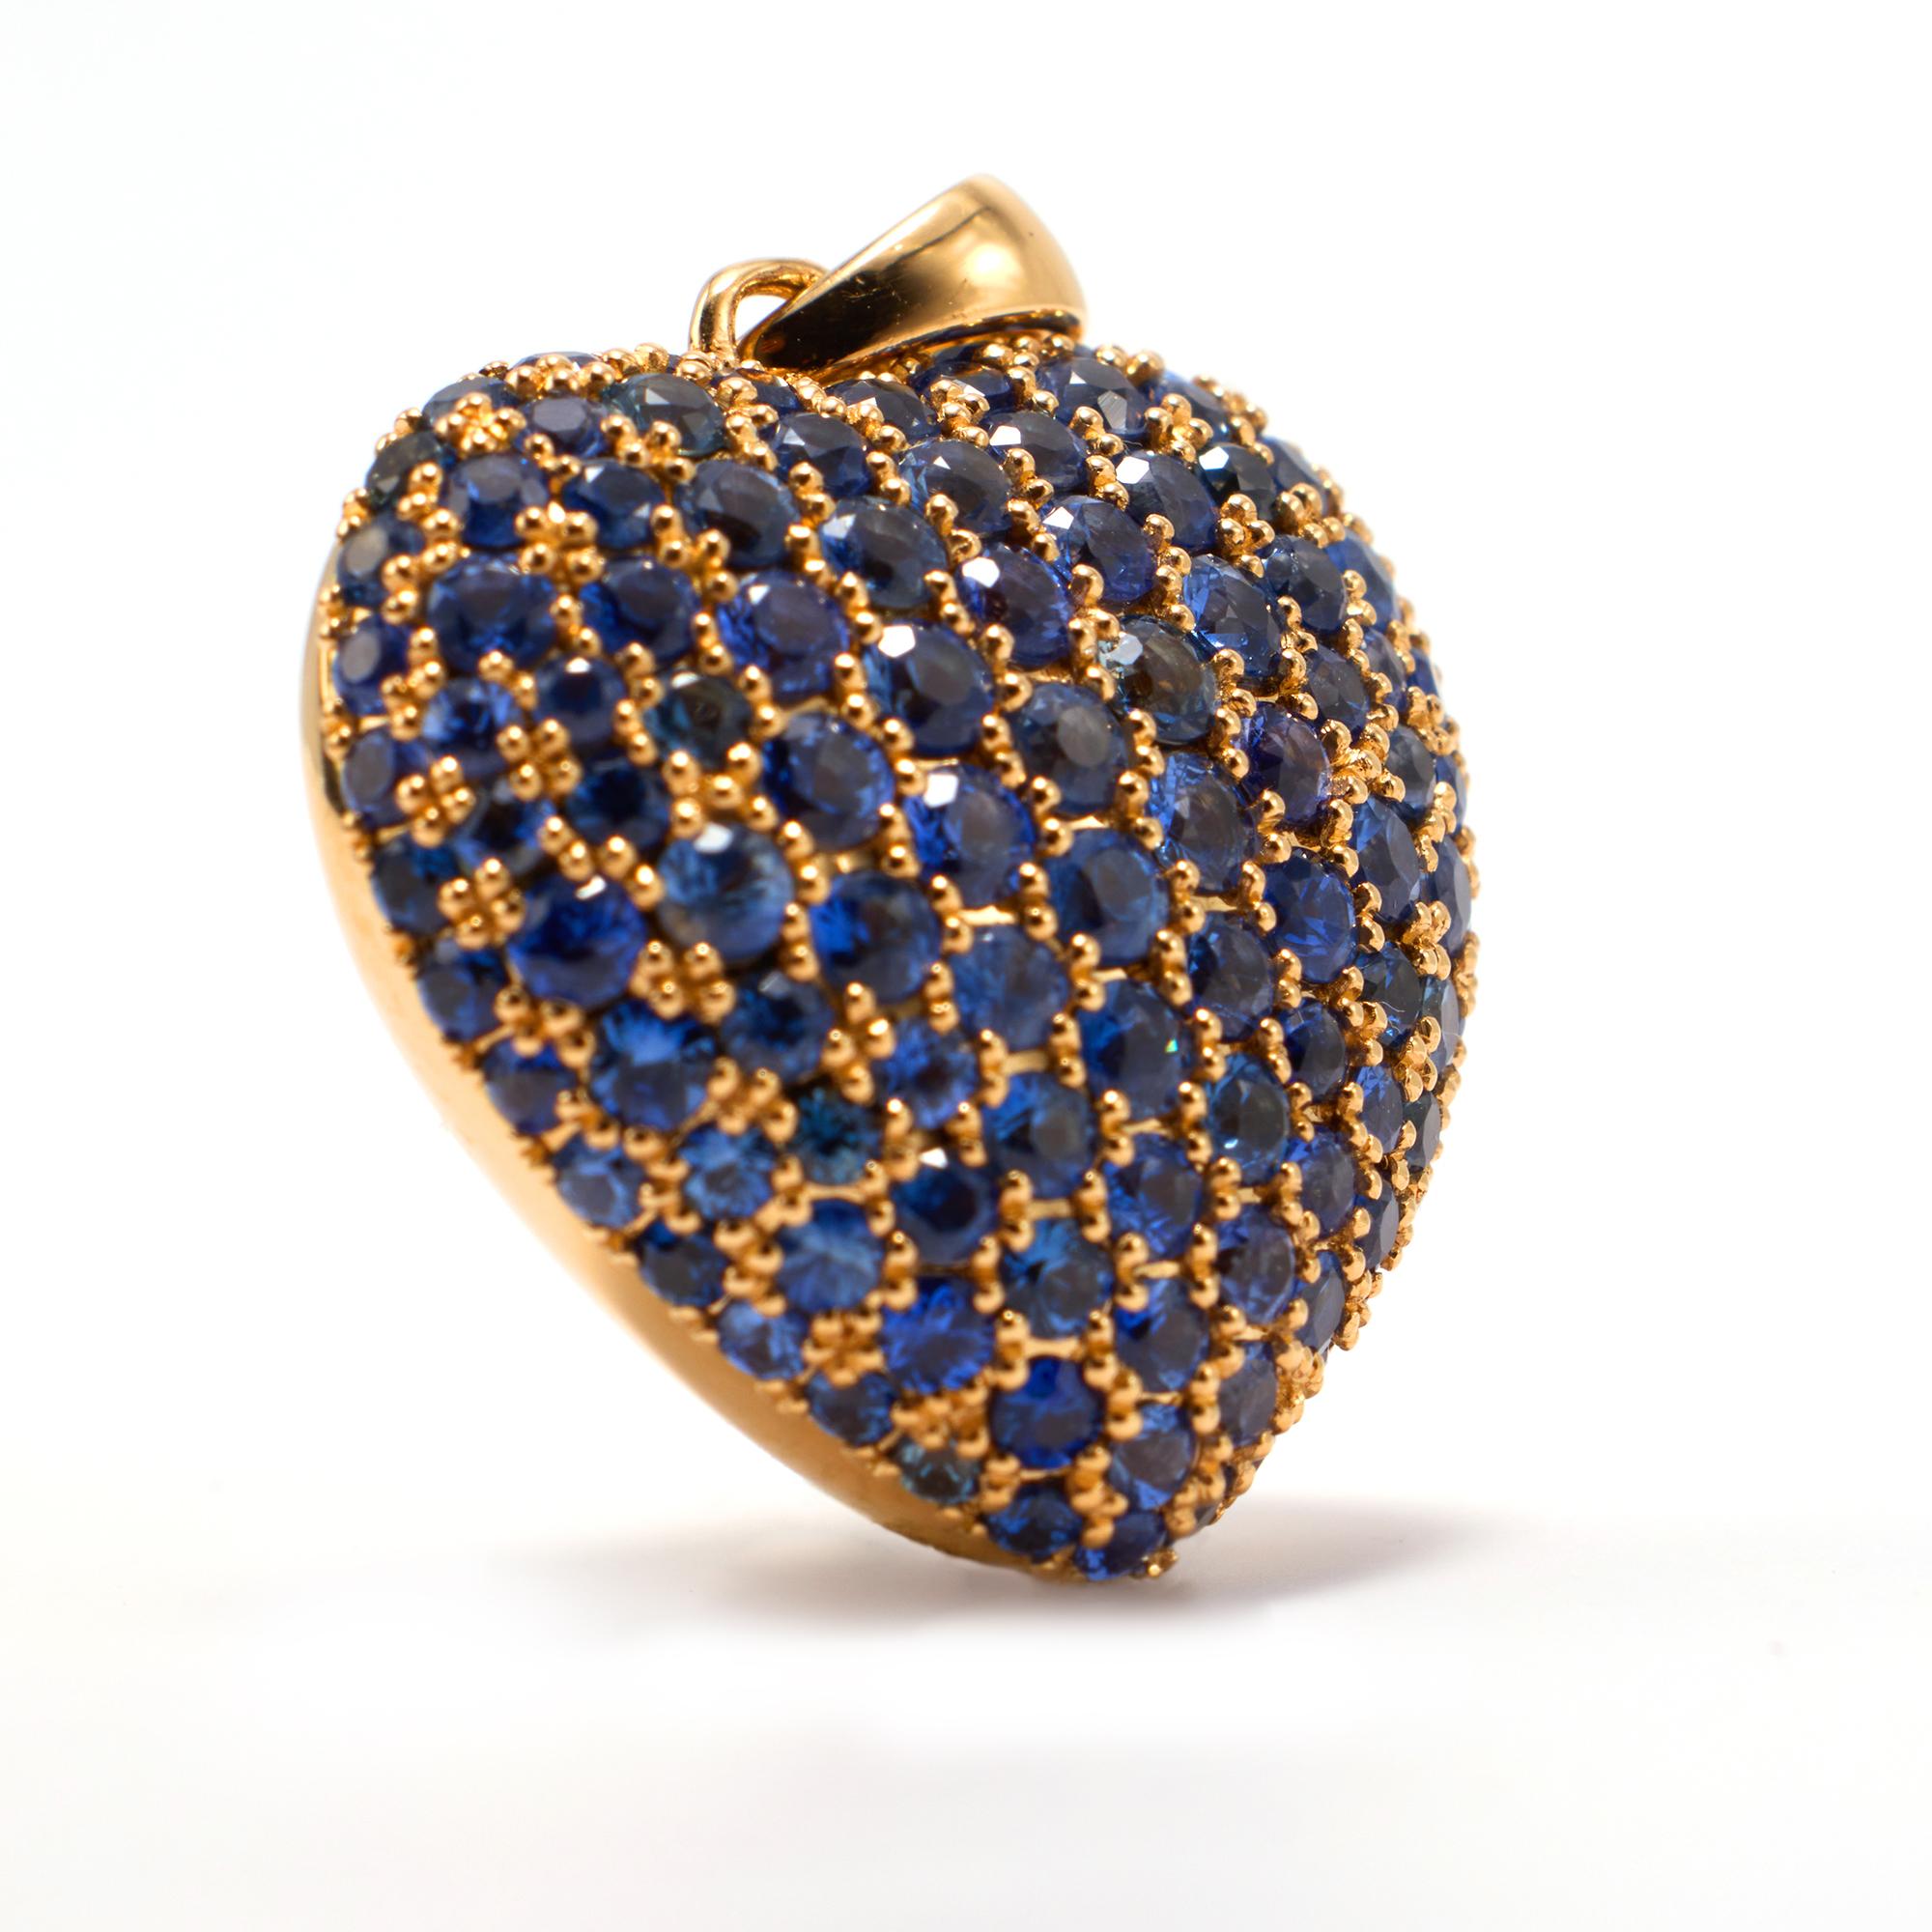 One of a kind natural blue sapphire heart shape pendant set in 18k gold. Special attention was paid to the proportions, shape and details of this pendant.  Every sapphire is natural mined, and hand selected to meet our strict grading standards. Over